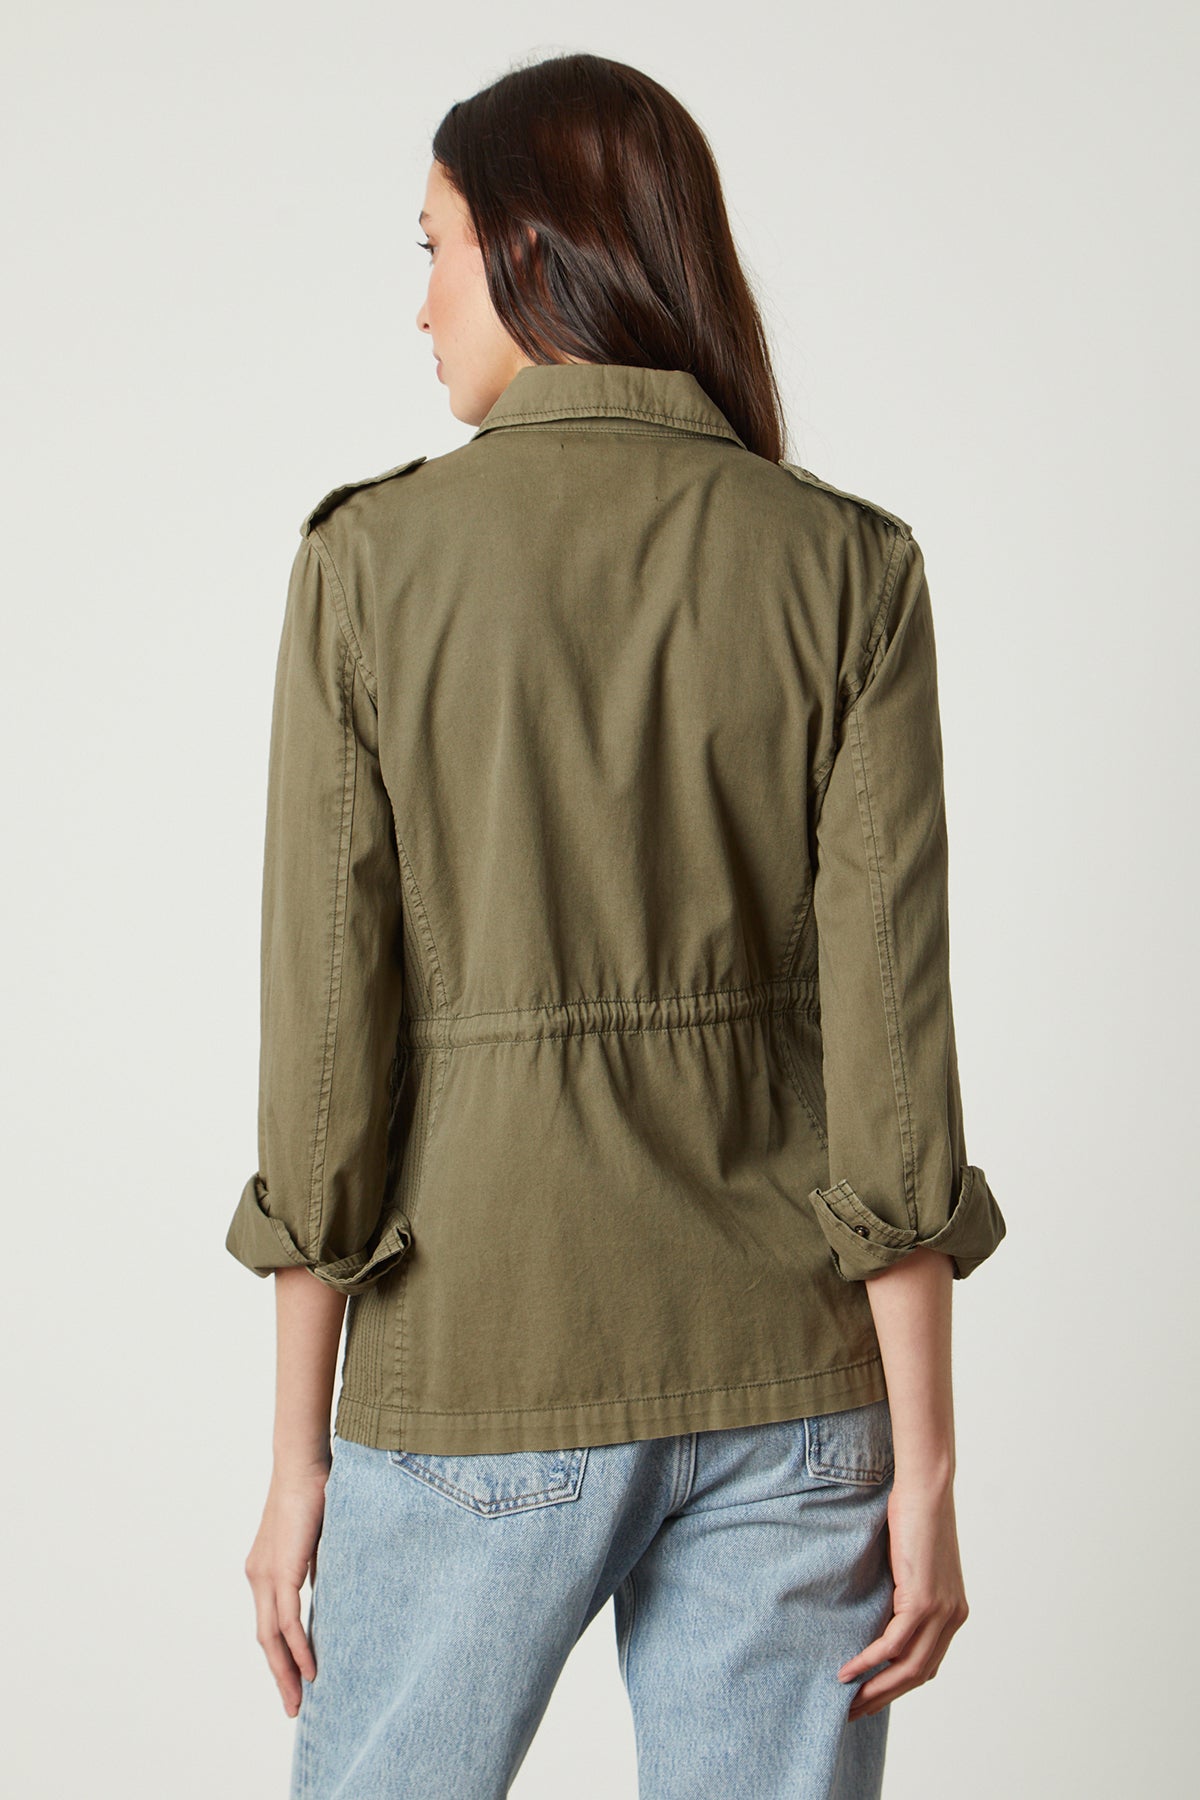 The view of a woman wearing a Velvet by Graham & Spencer RUBY LIGHT-WEIGHT ARMY JACKET.-35207198638273